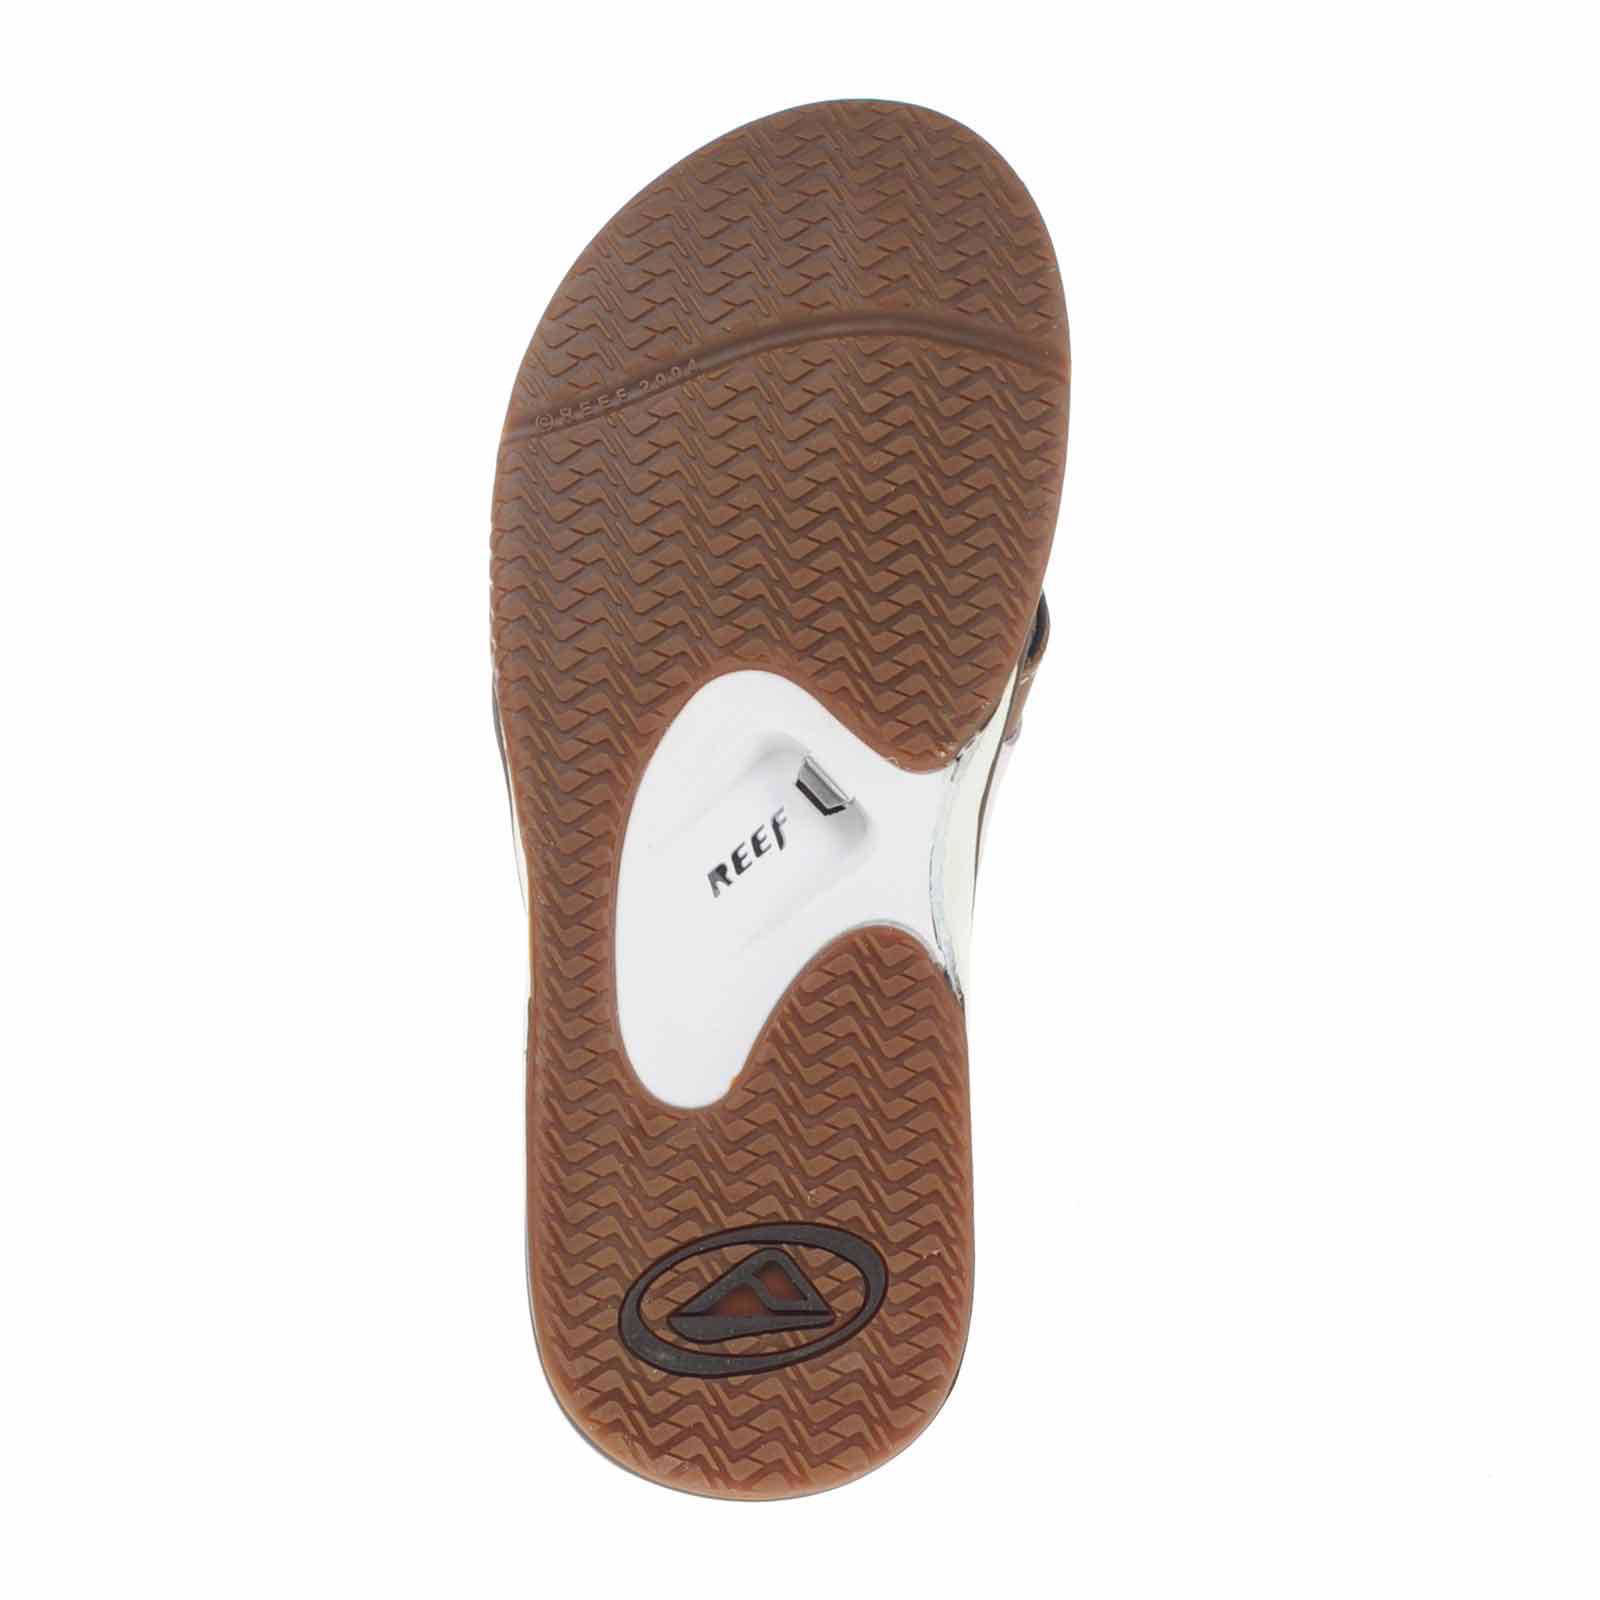 branded mens sandals at lowest price